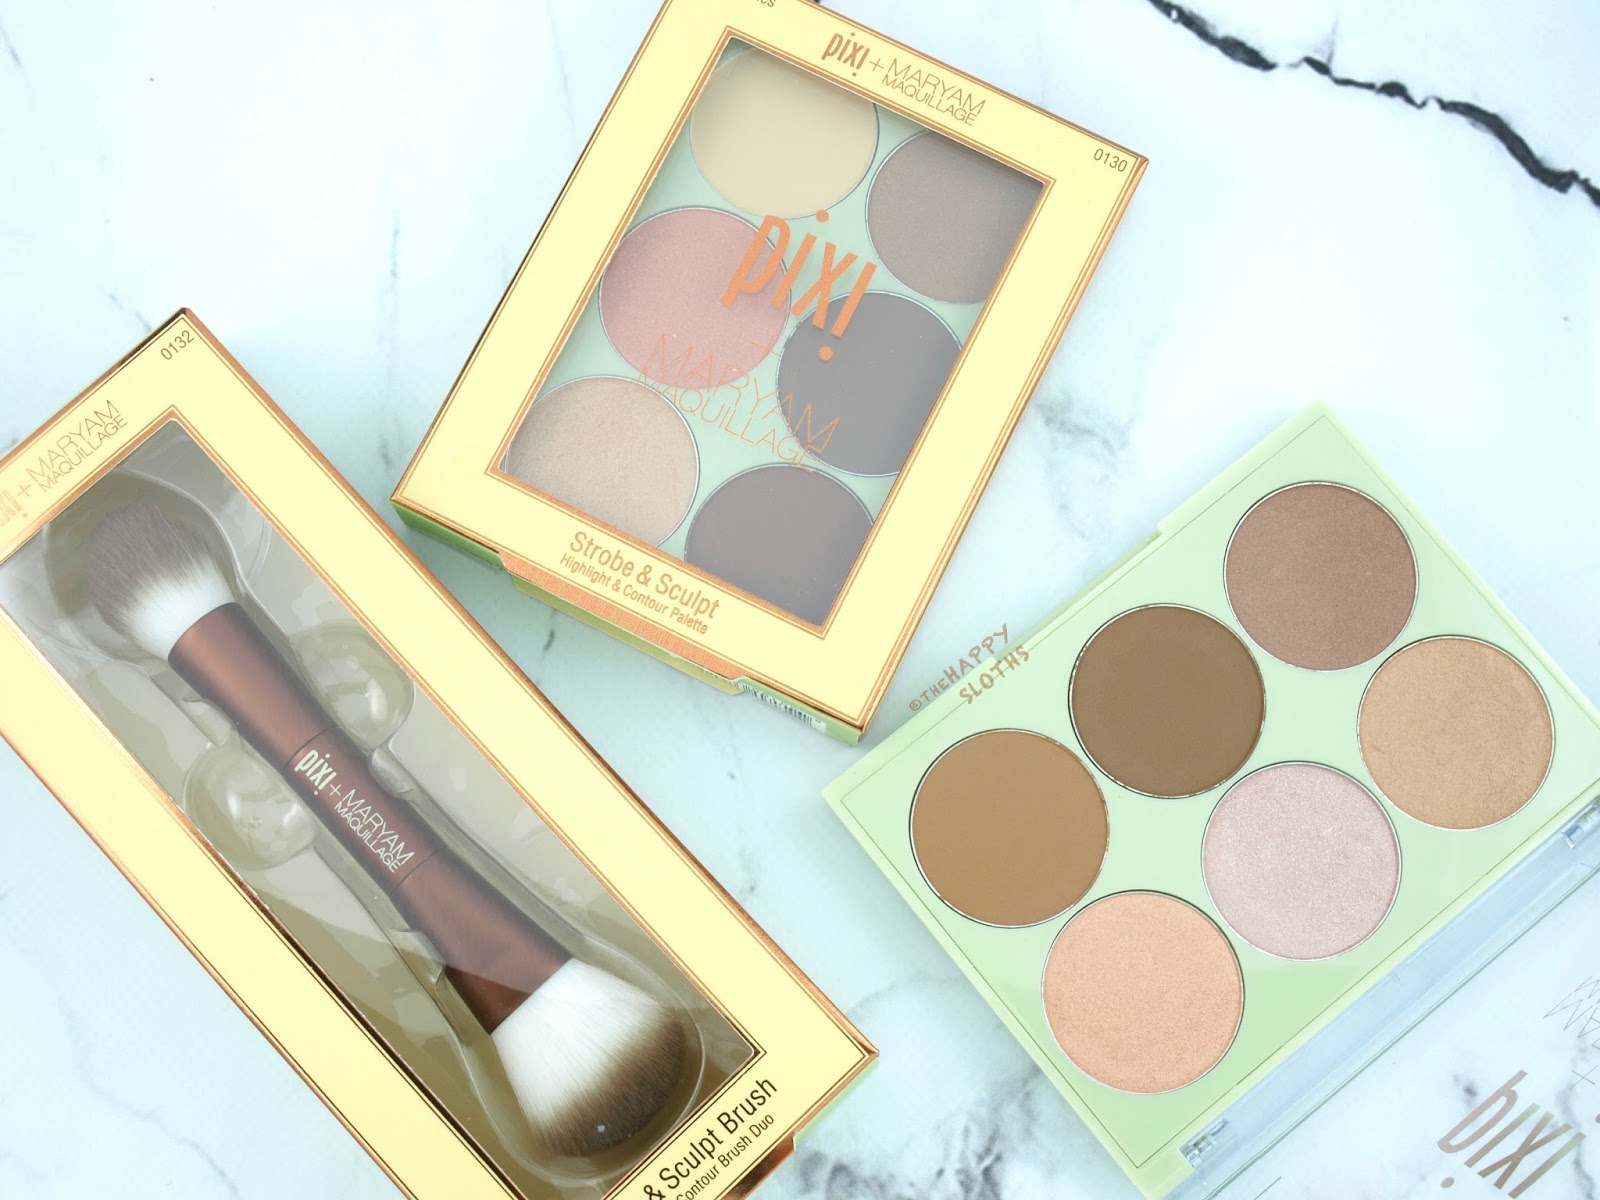 Pixi + Maryam Maquillage Collaboration | Strobe & Sculpt + Strobe & Bronze Palettes: Review and Swatches